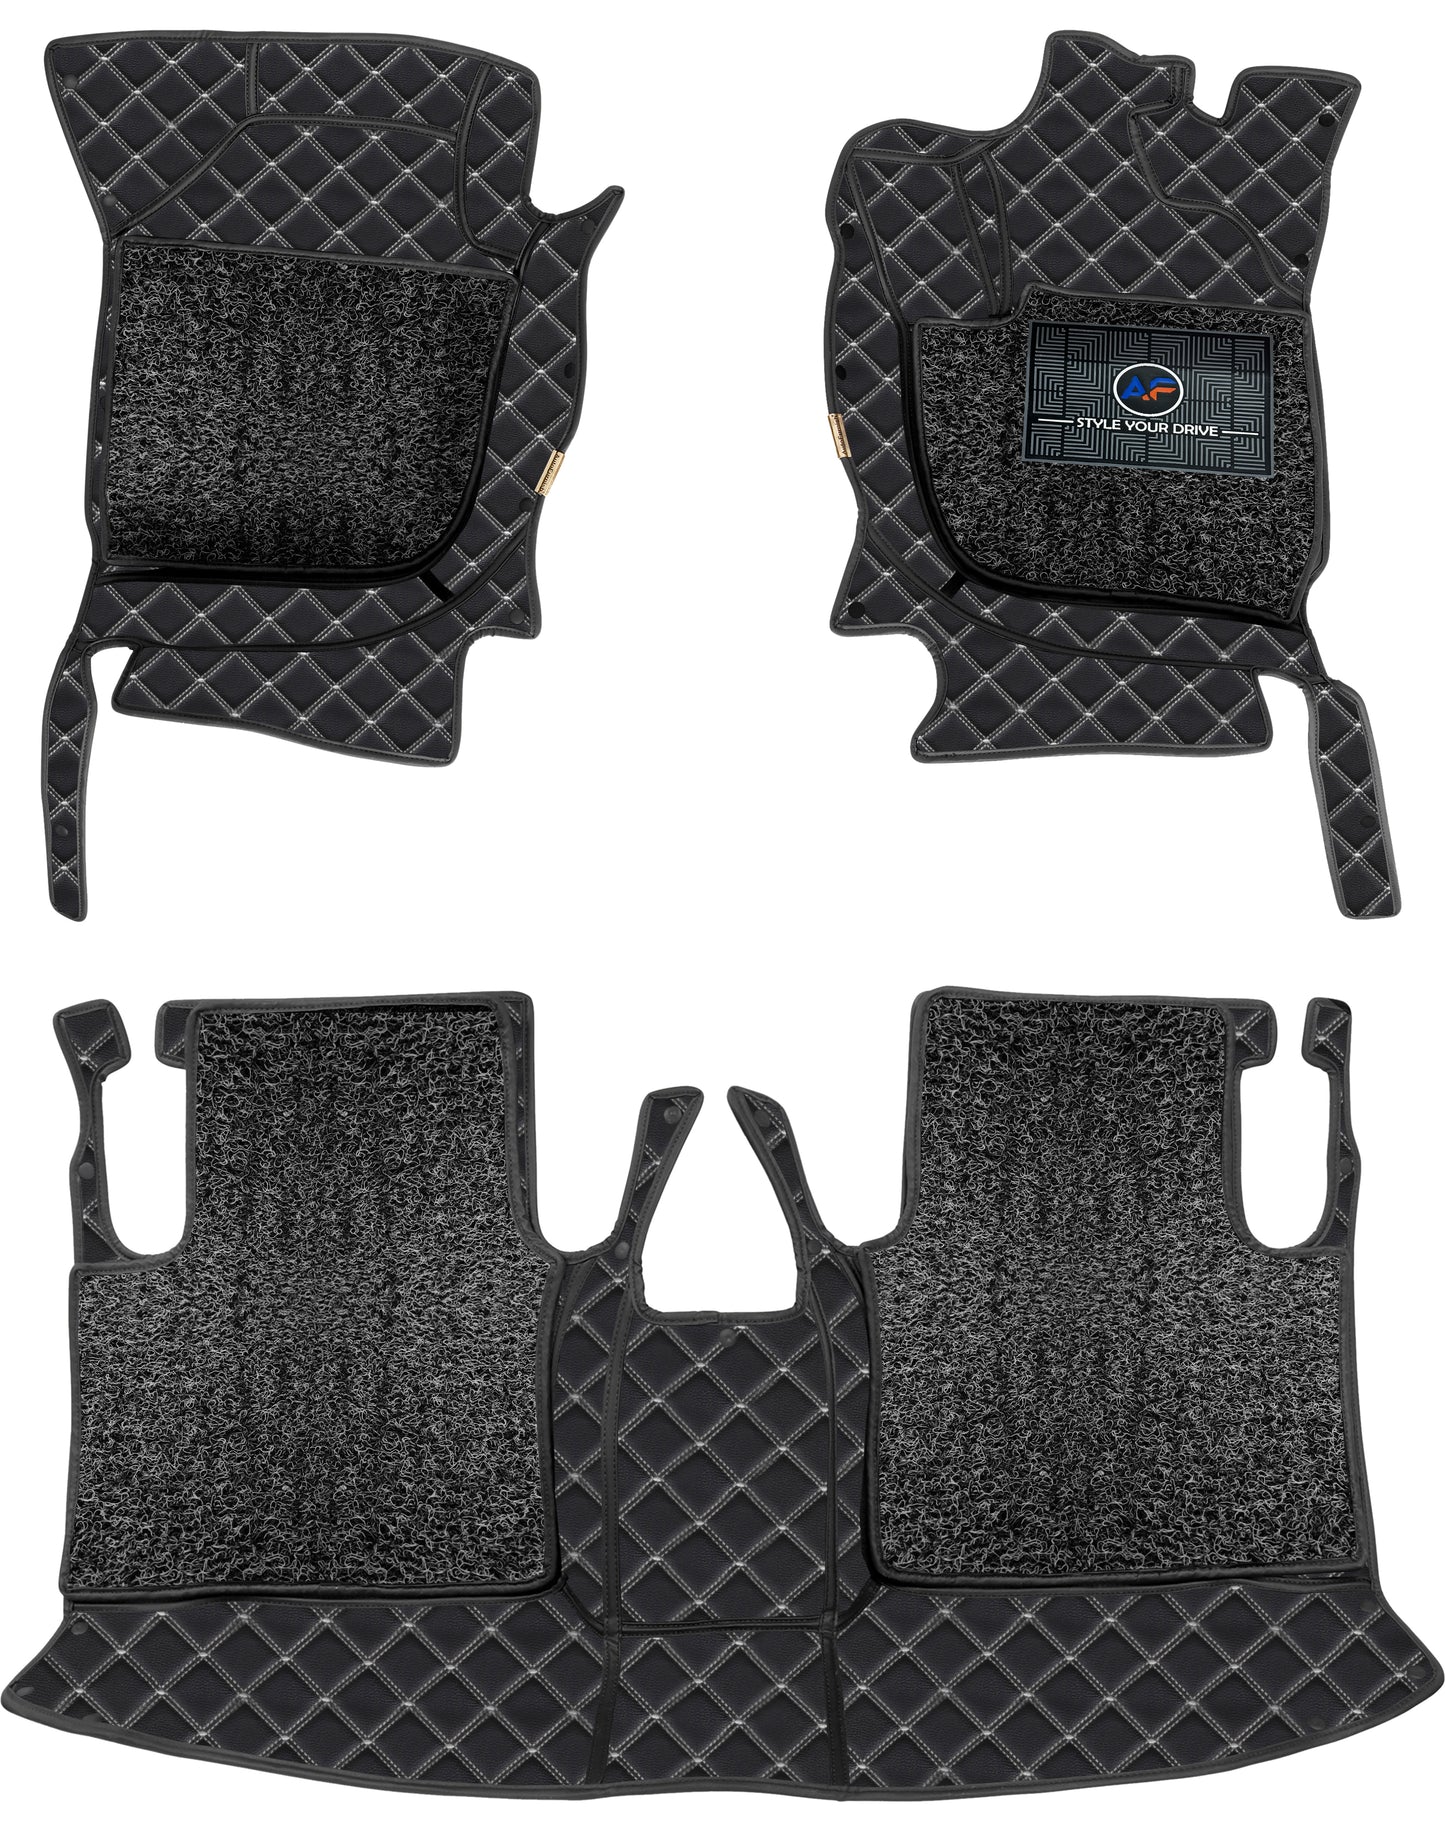 KIA Carnival (7 Seater) 2020 7D Luxury Car Mat, All Weather Proof, Anti-Skid, 100% Waterproof & Odorless with Unique Diamond Fish Design (24mm Luxury PU Leather, 2 Rows)